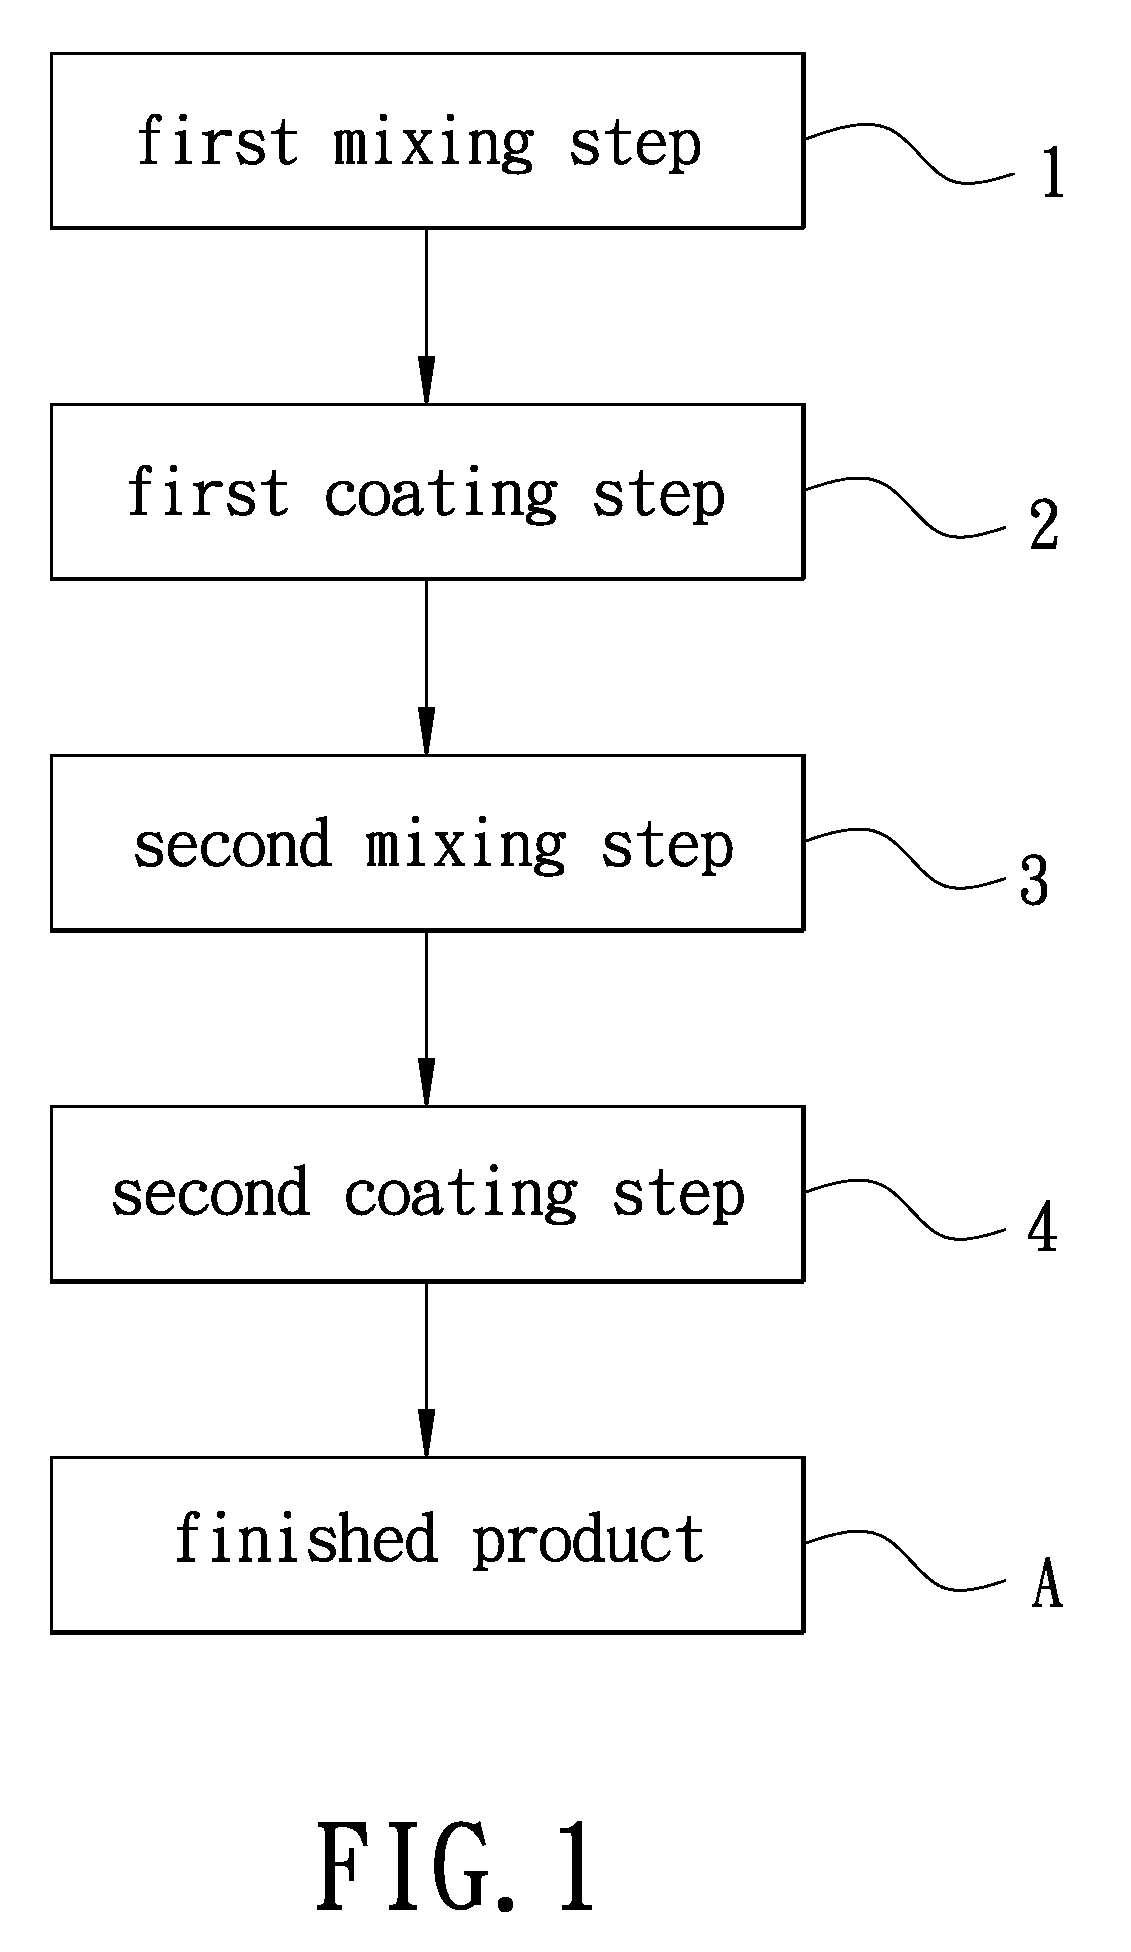 Method of manufacturing an adhesive material that can be printed and repeatedly stuck and torn